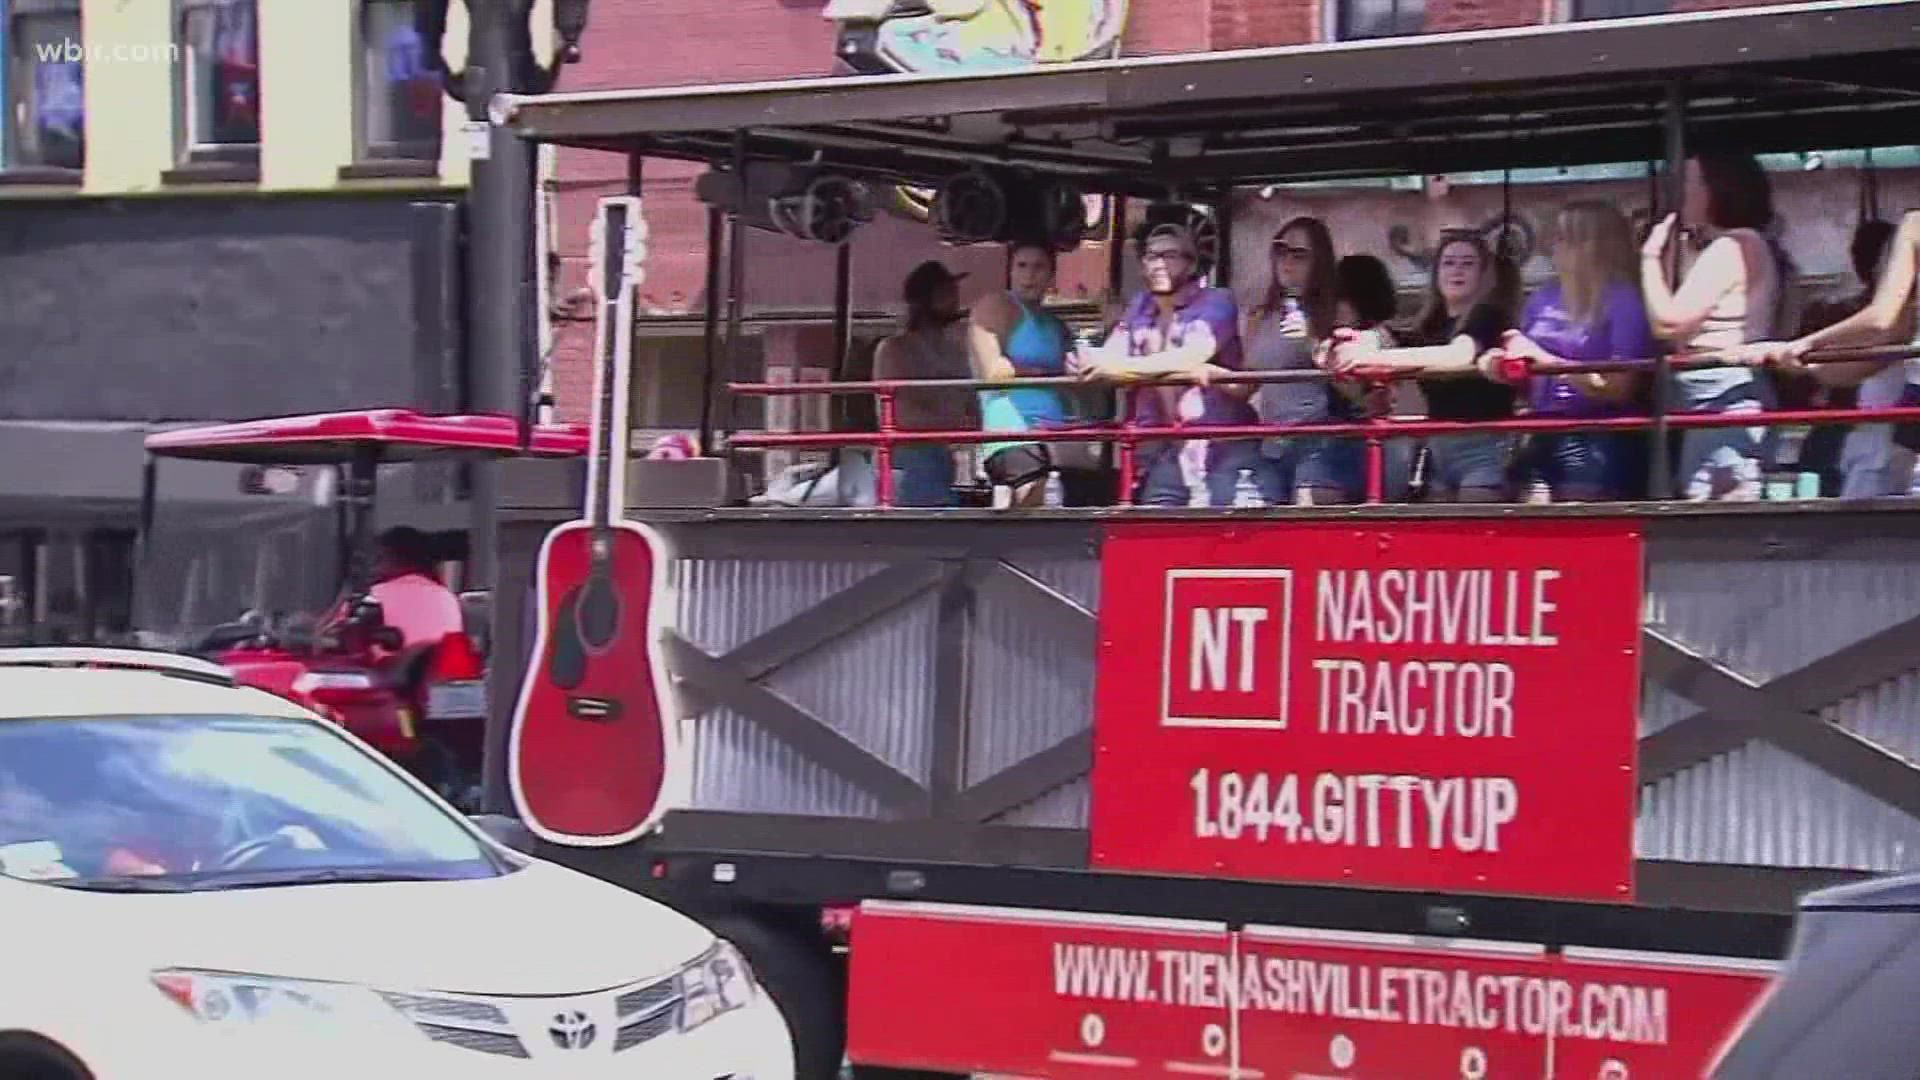 City leaders in Nashville passed new rules adding restrictions on mobile party buses, bikes, and trailers, which will ban drinking on open-air vehicles.